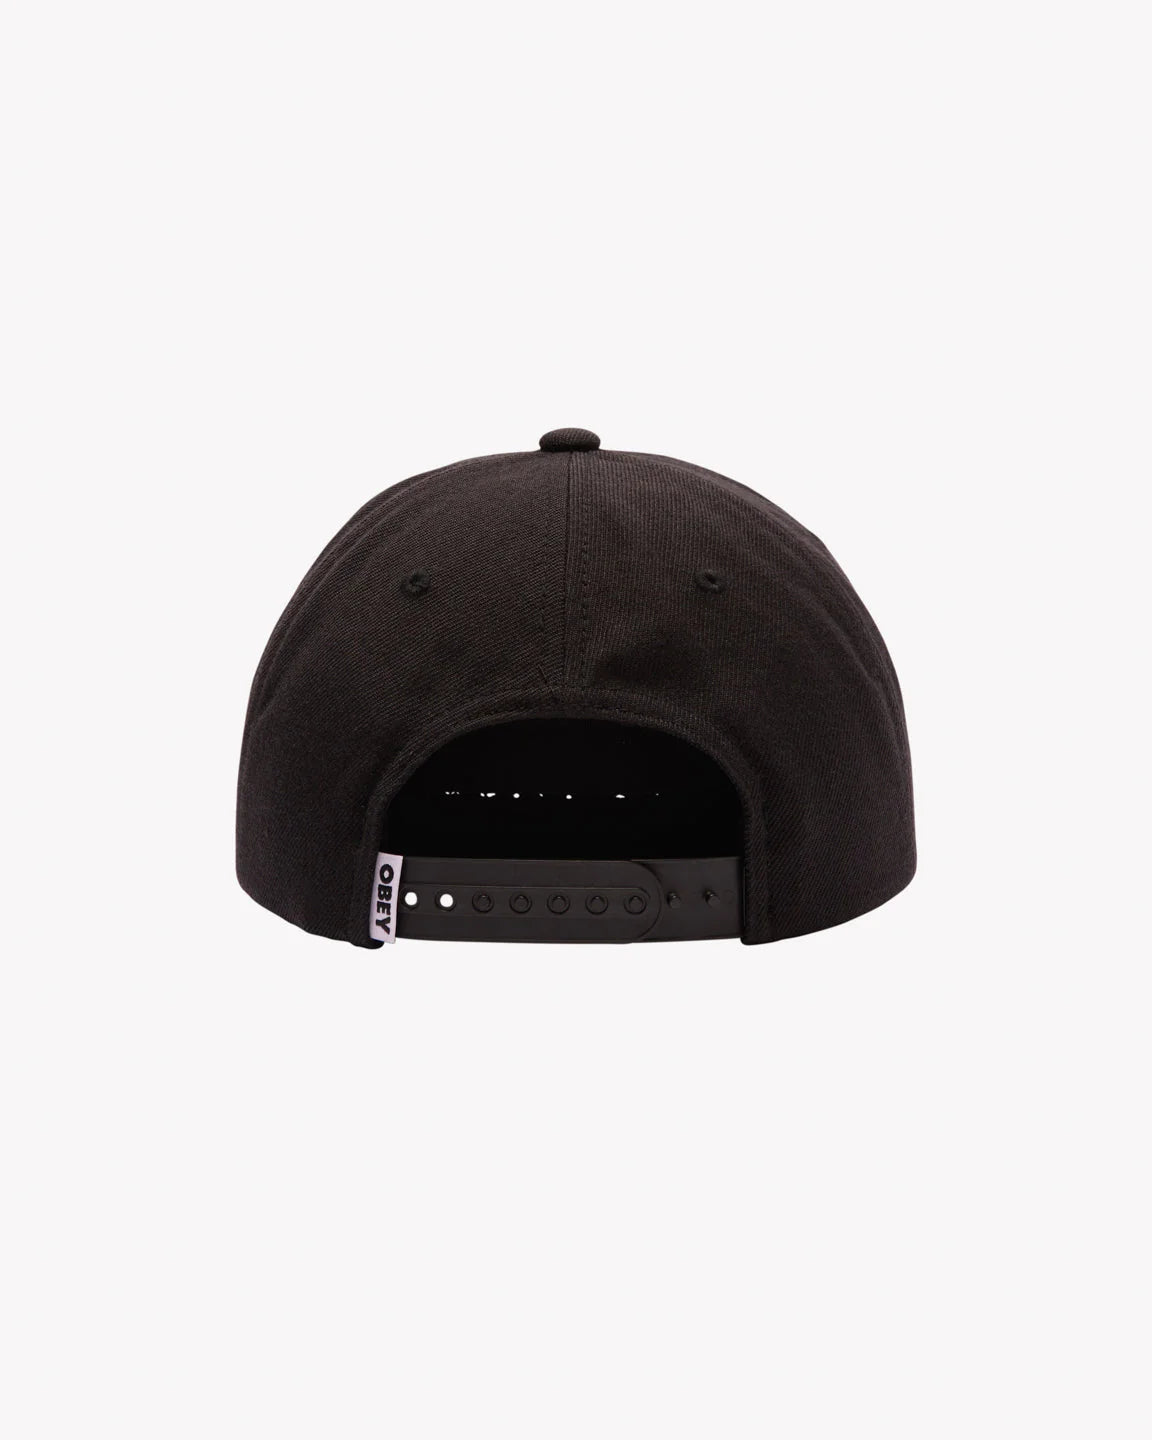 Obey Chaos 6 Panel Classic Snapback (Black)